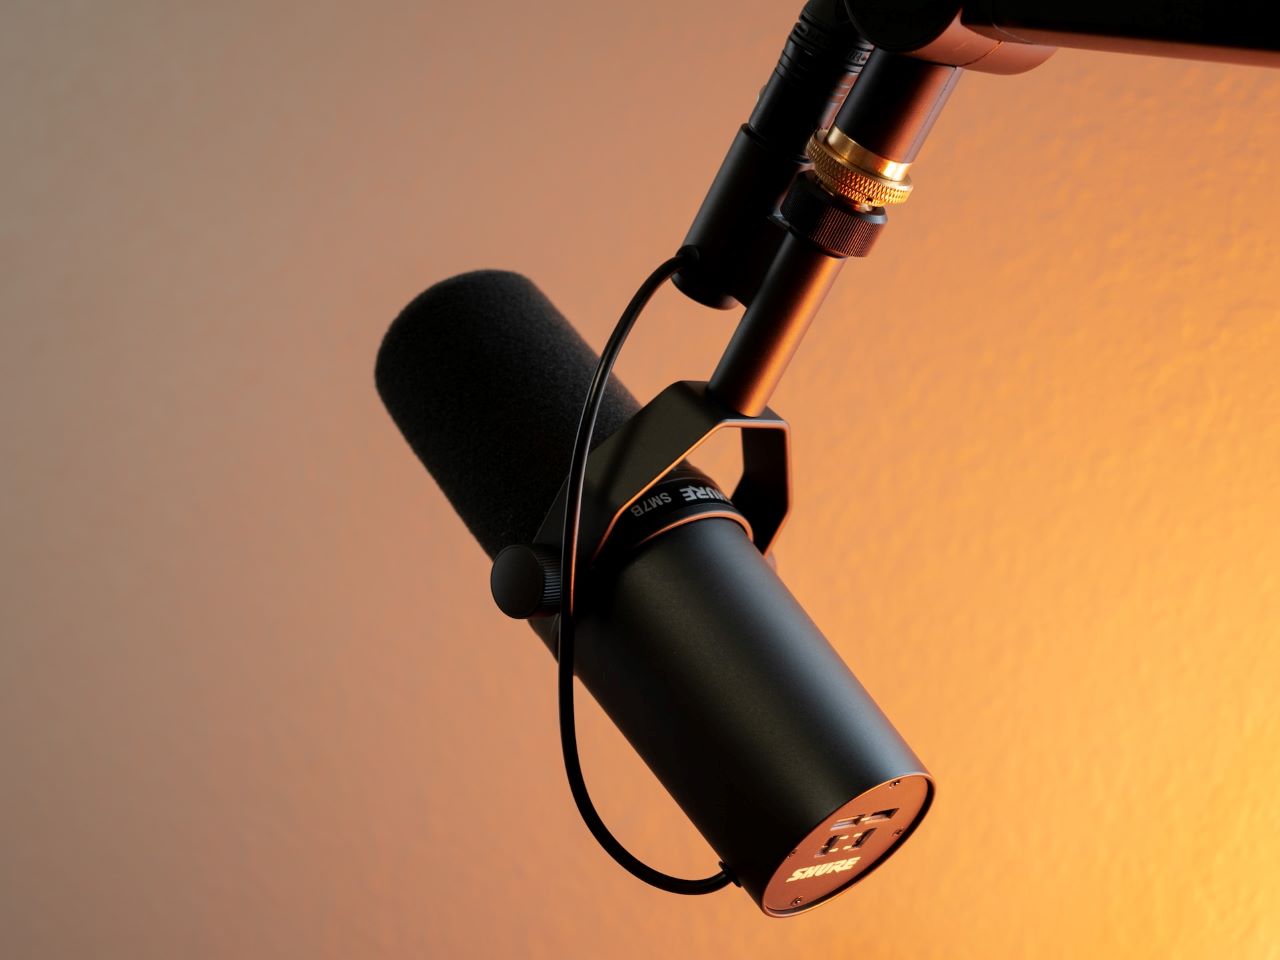 Shure SM7B switches: Located at the rear of the microphone, the High Pass Filter switch is easily accessible and can be adjusted using a small flathead screwdriver.